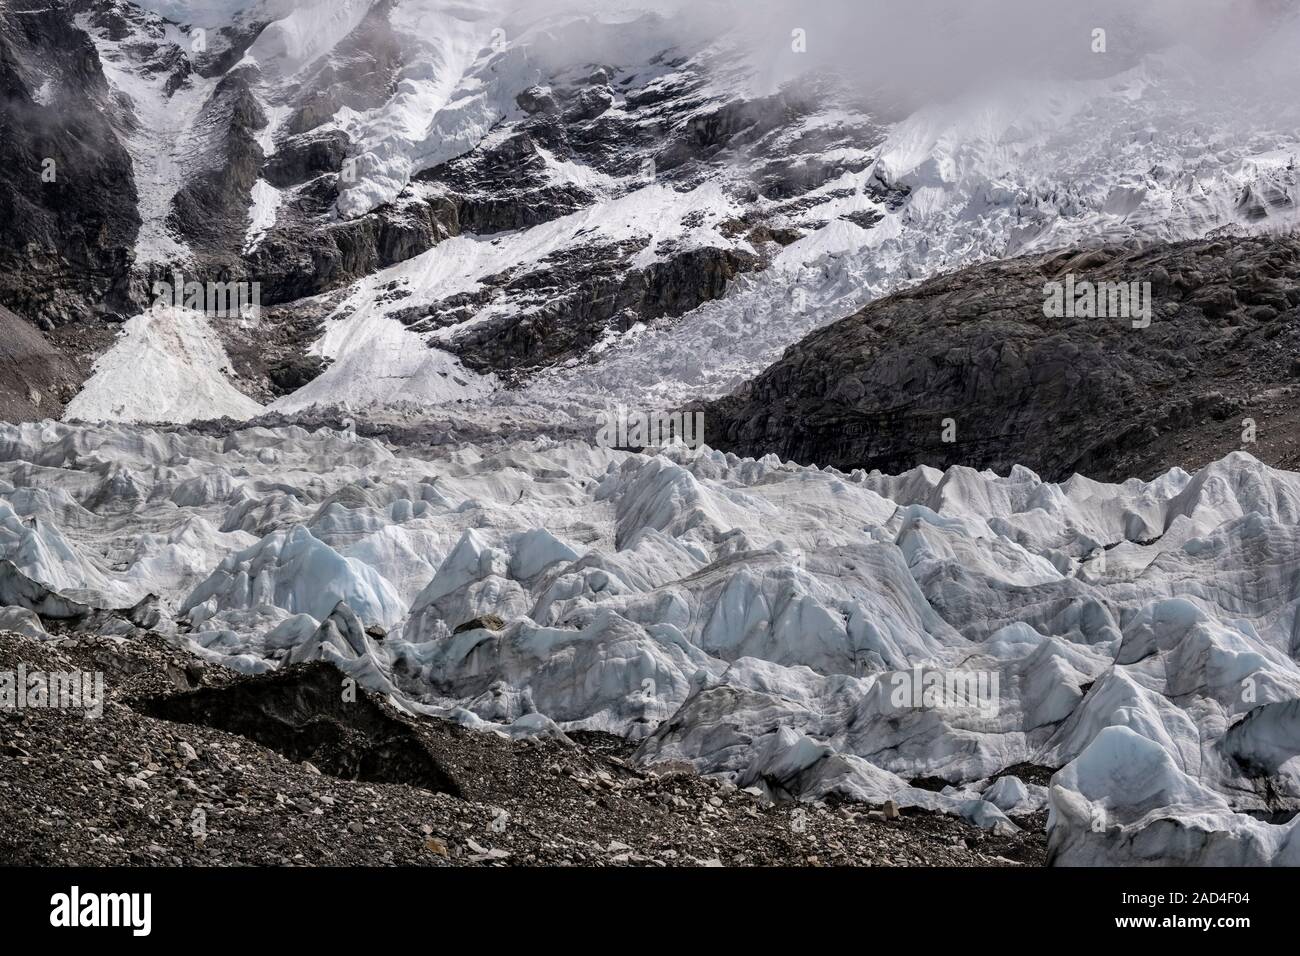 Ice formations on Khumbu glacier, Khumbu Icefall behind covered by monsoon clouds Stock Photo